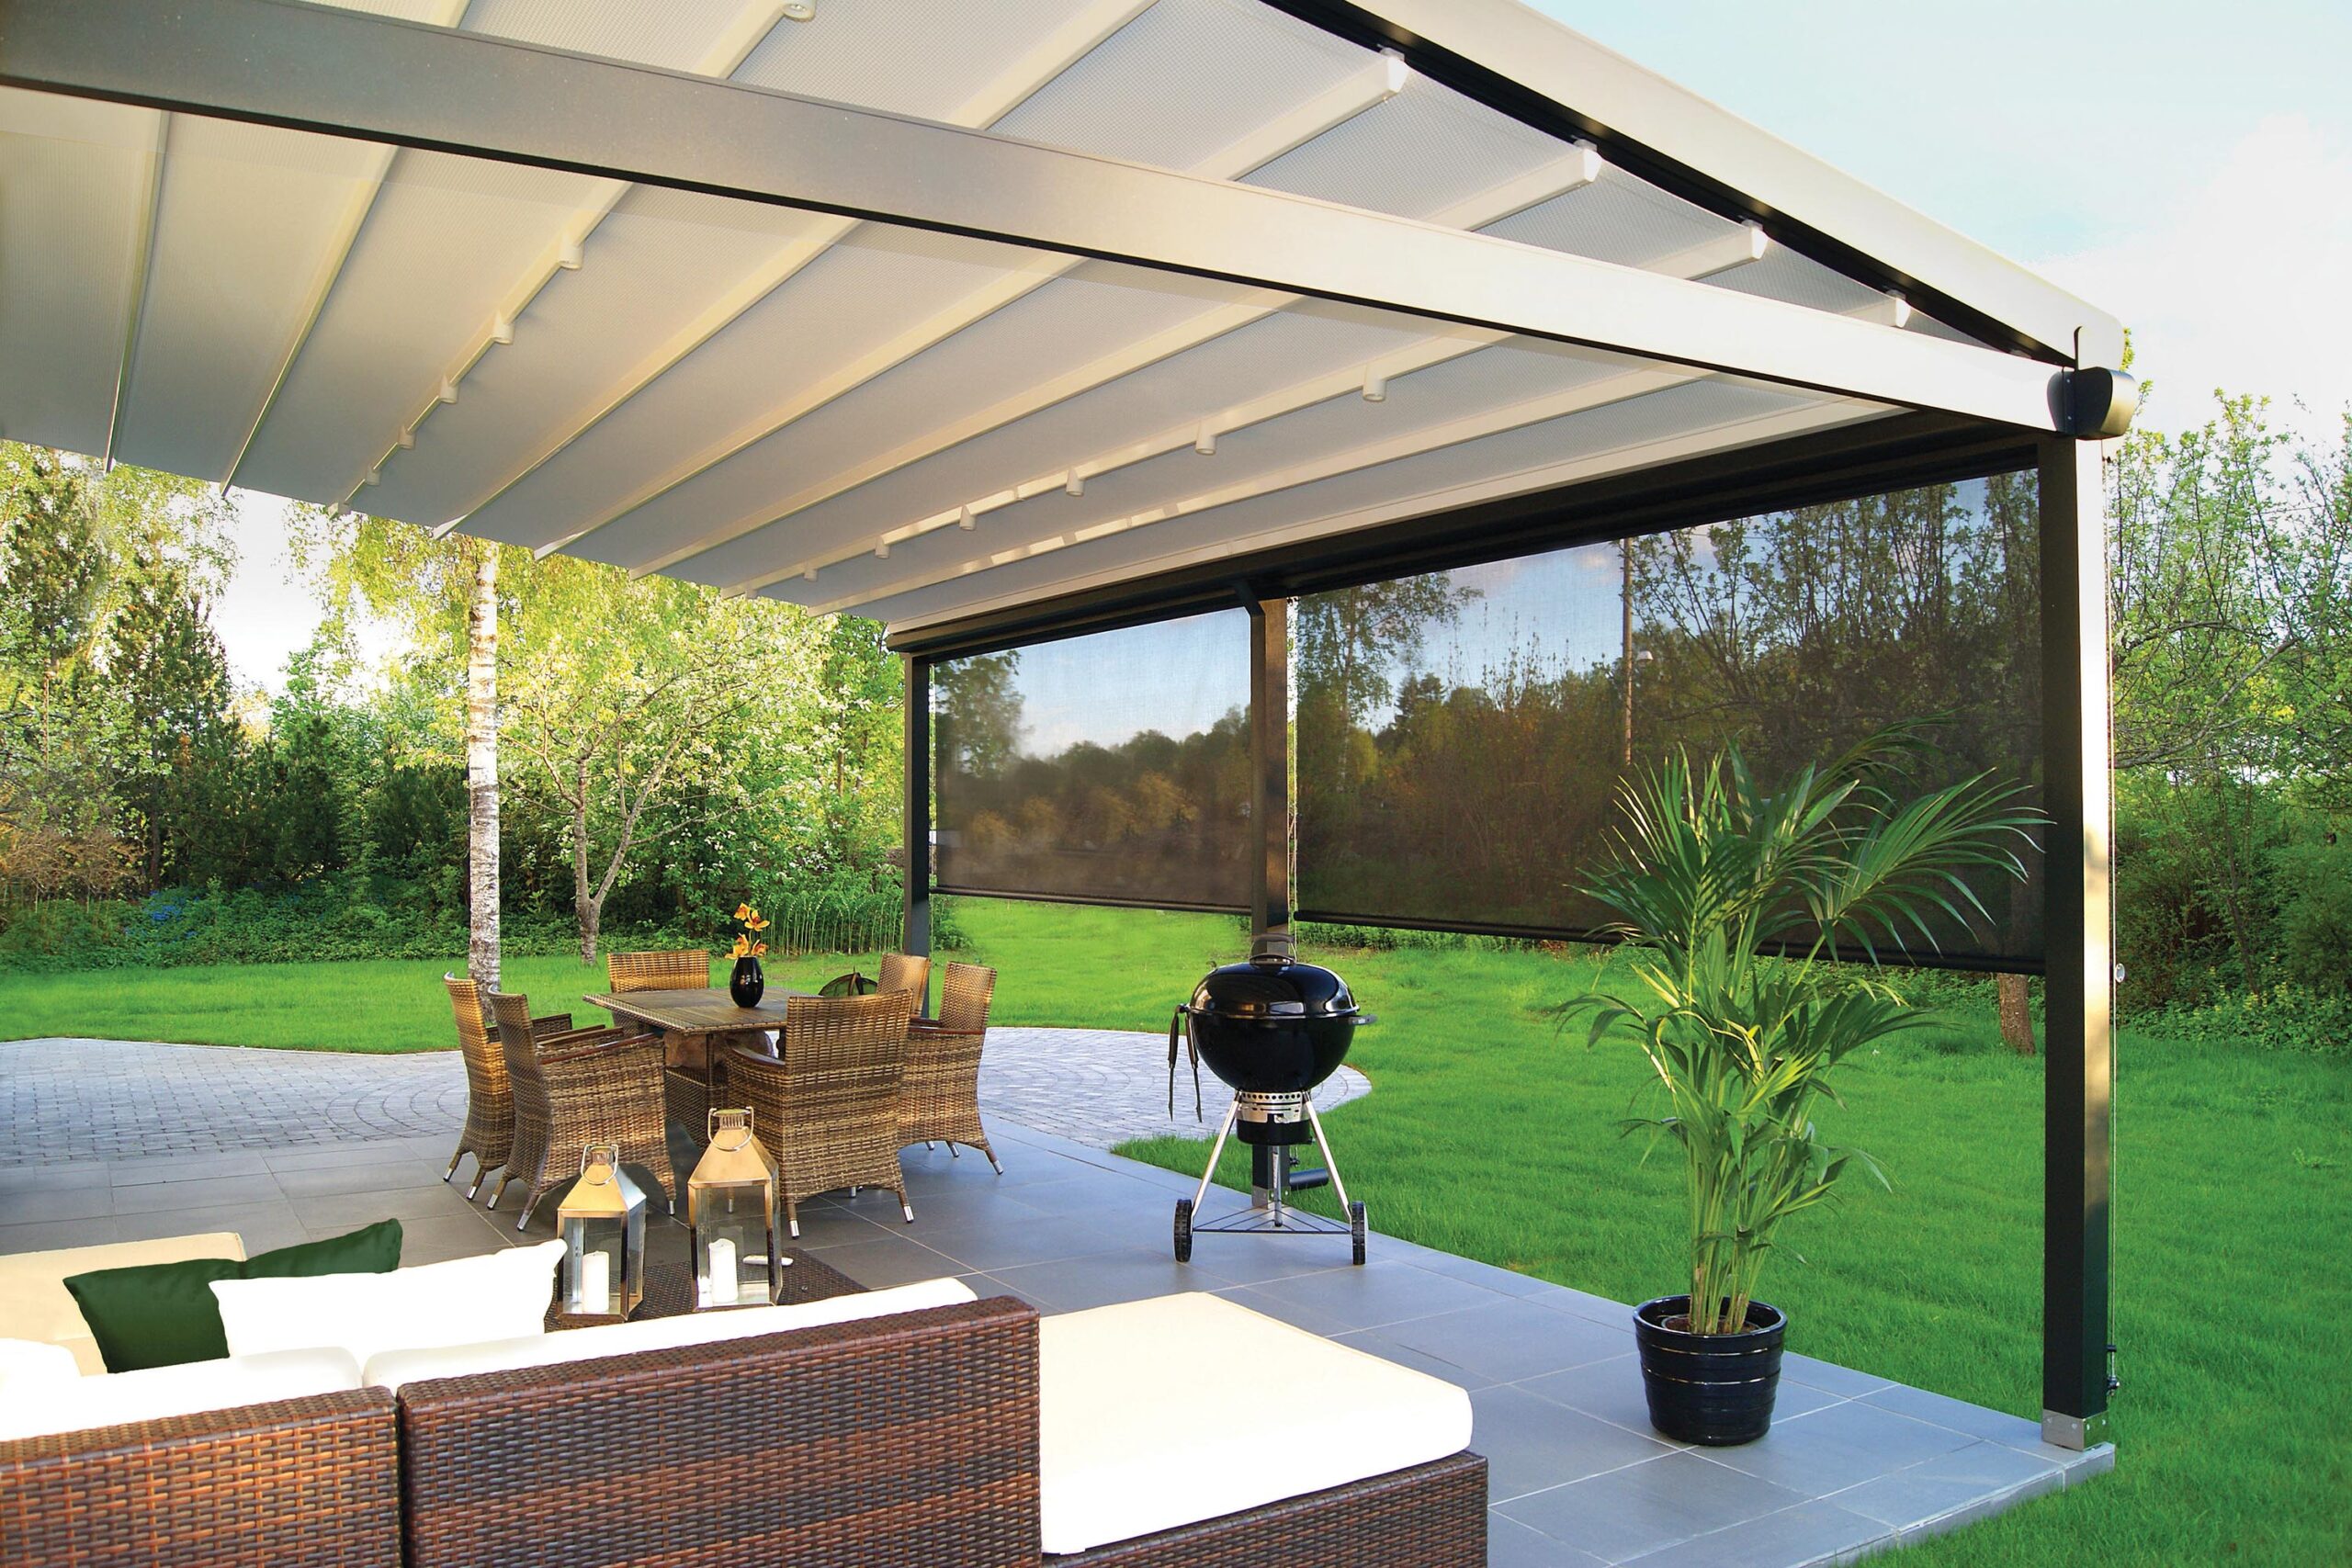 Customized Pergola Glass System Installed | Luxx Outdoor